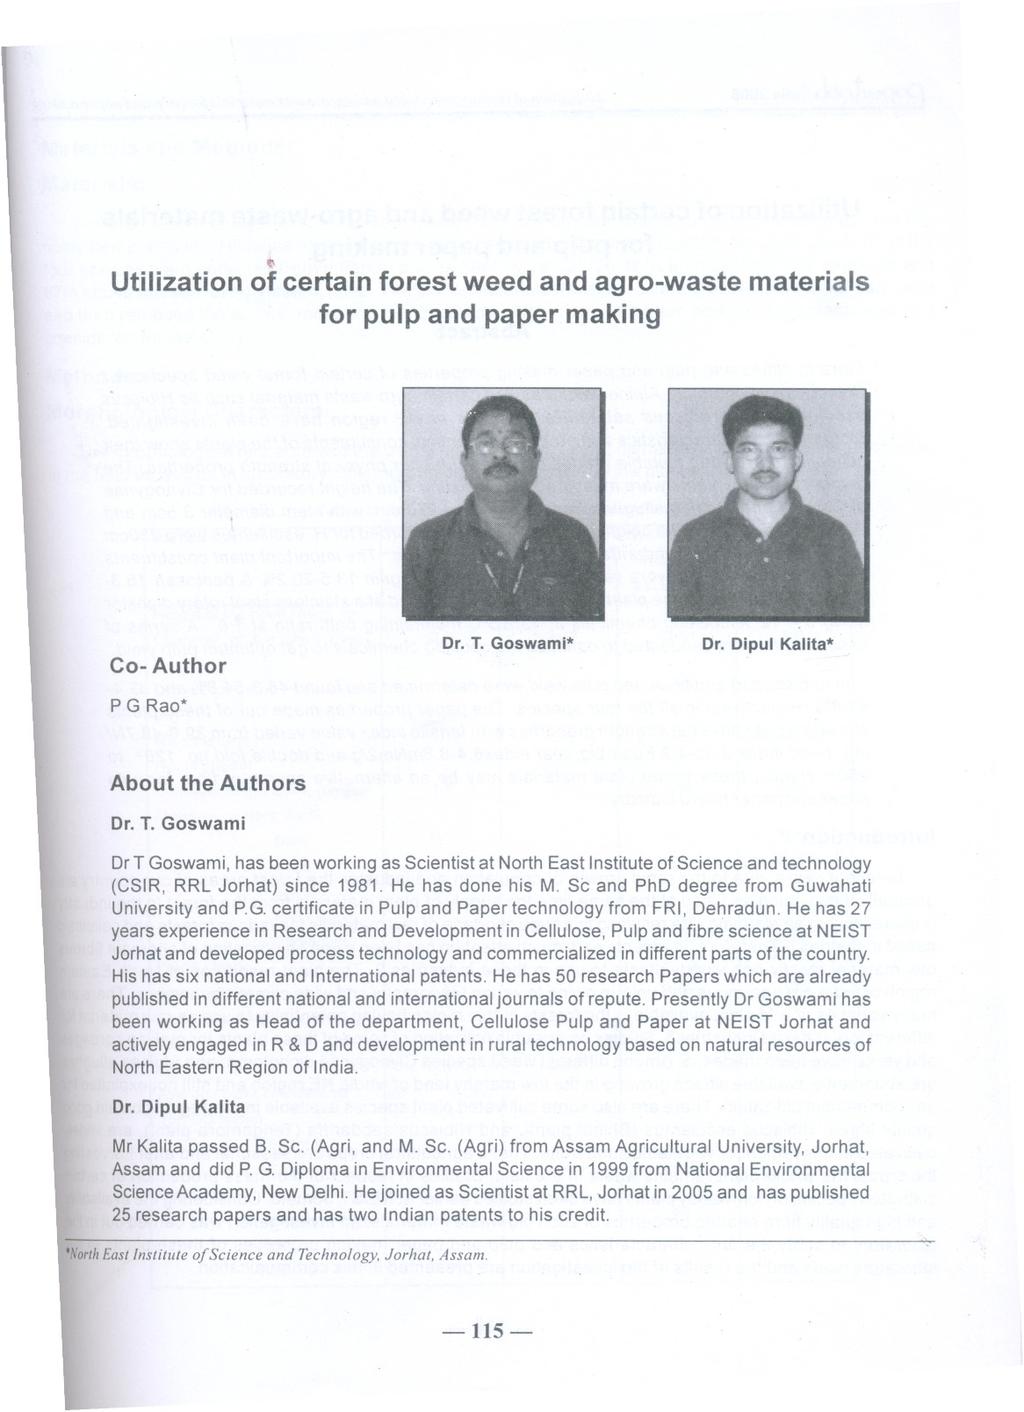 ~ Utilization of certain forest weed and agro-waste for pulp and paper making materials Co- Author P G Rao* Dr. T.